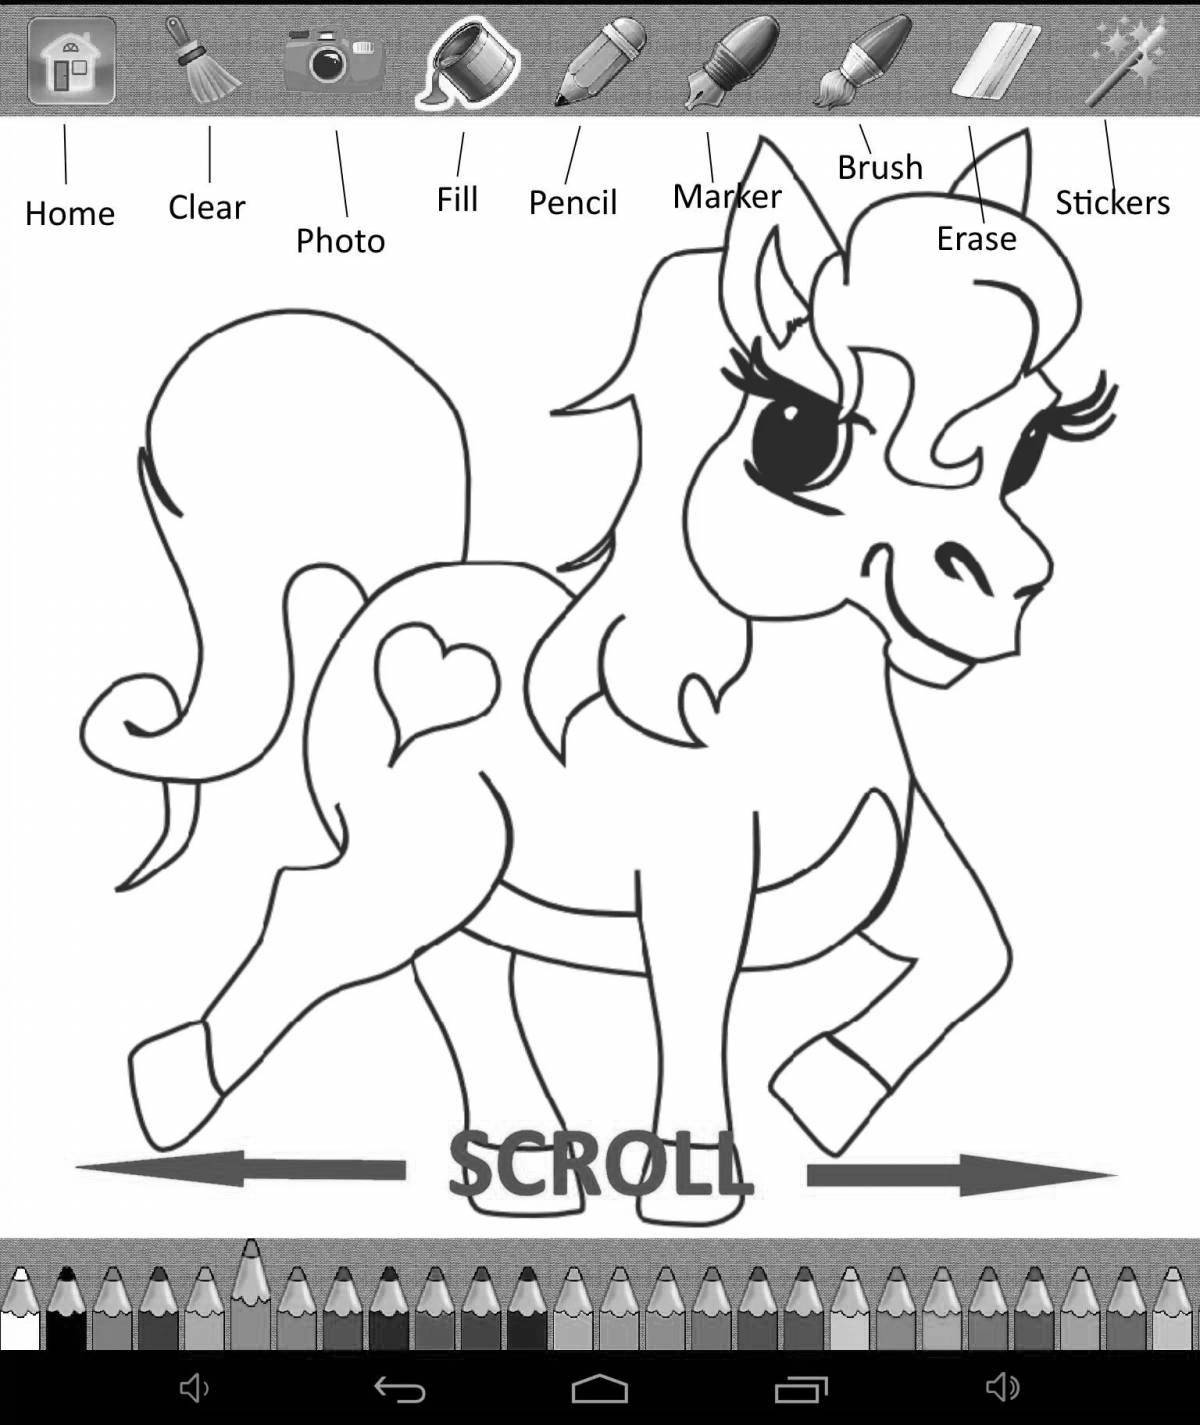 Interactive coloring pages for kids